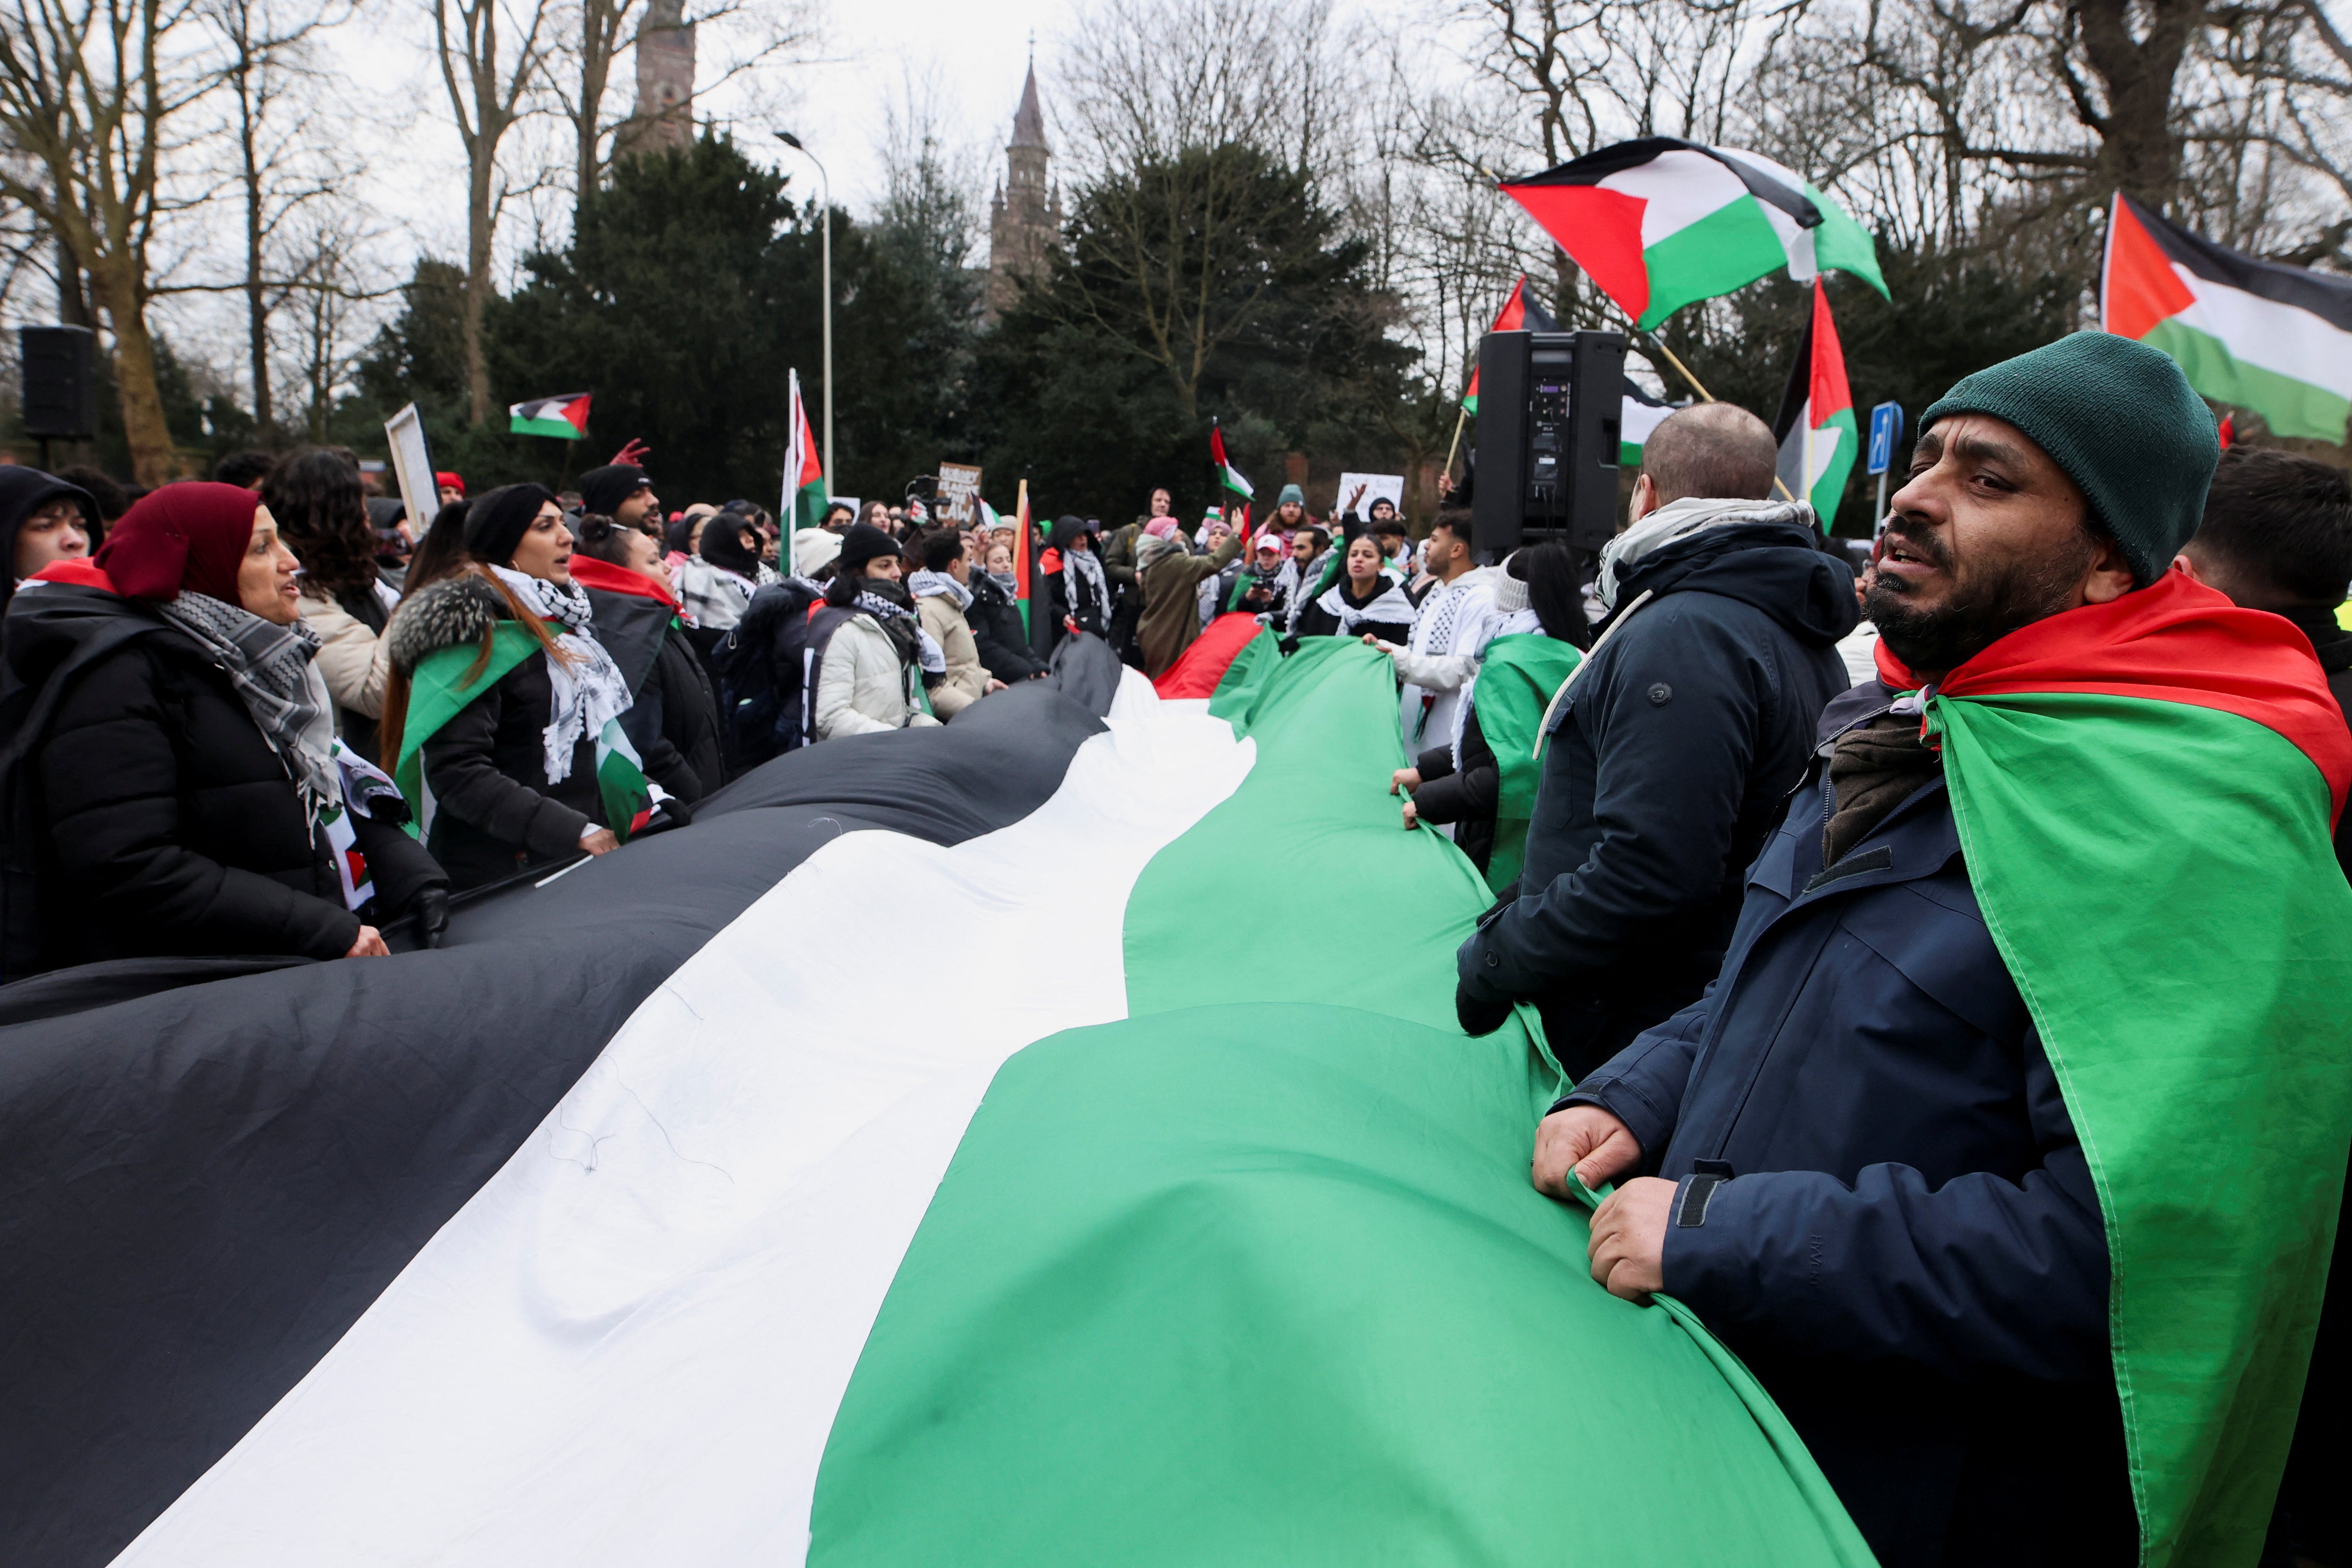 Pro-Palestinian demonstrators protest outside the International Court of Justice